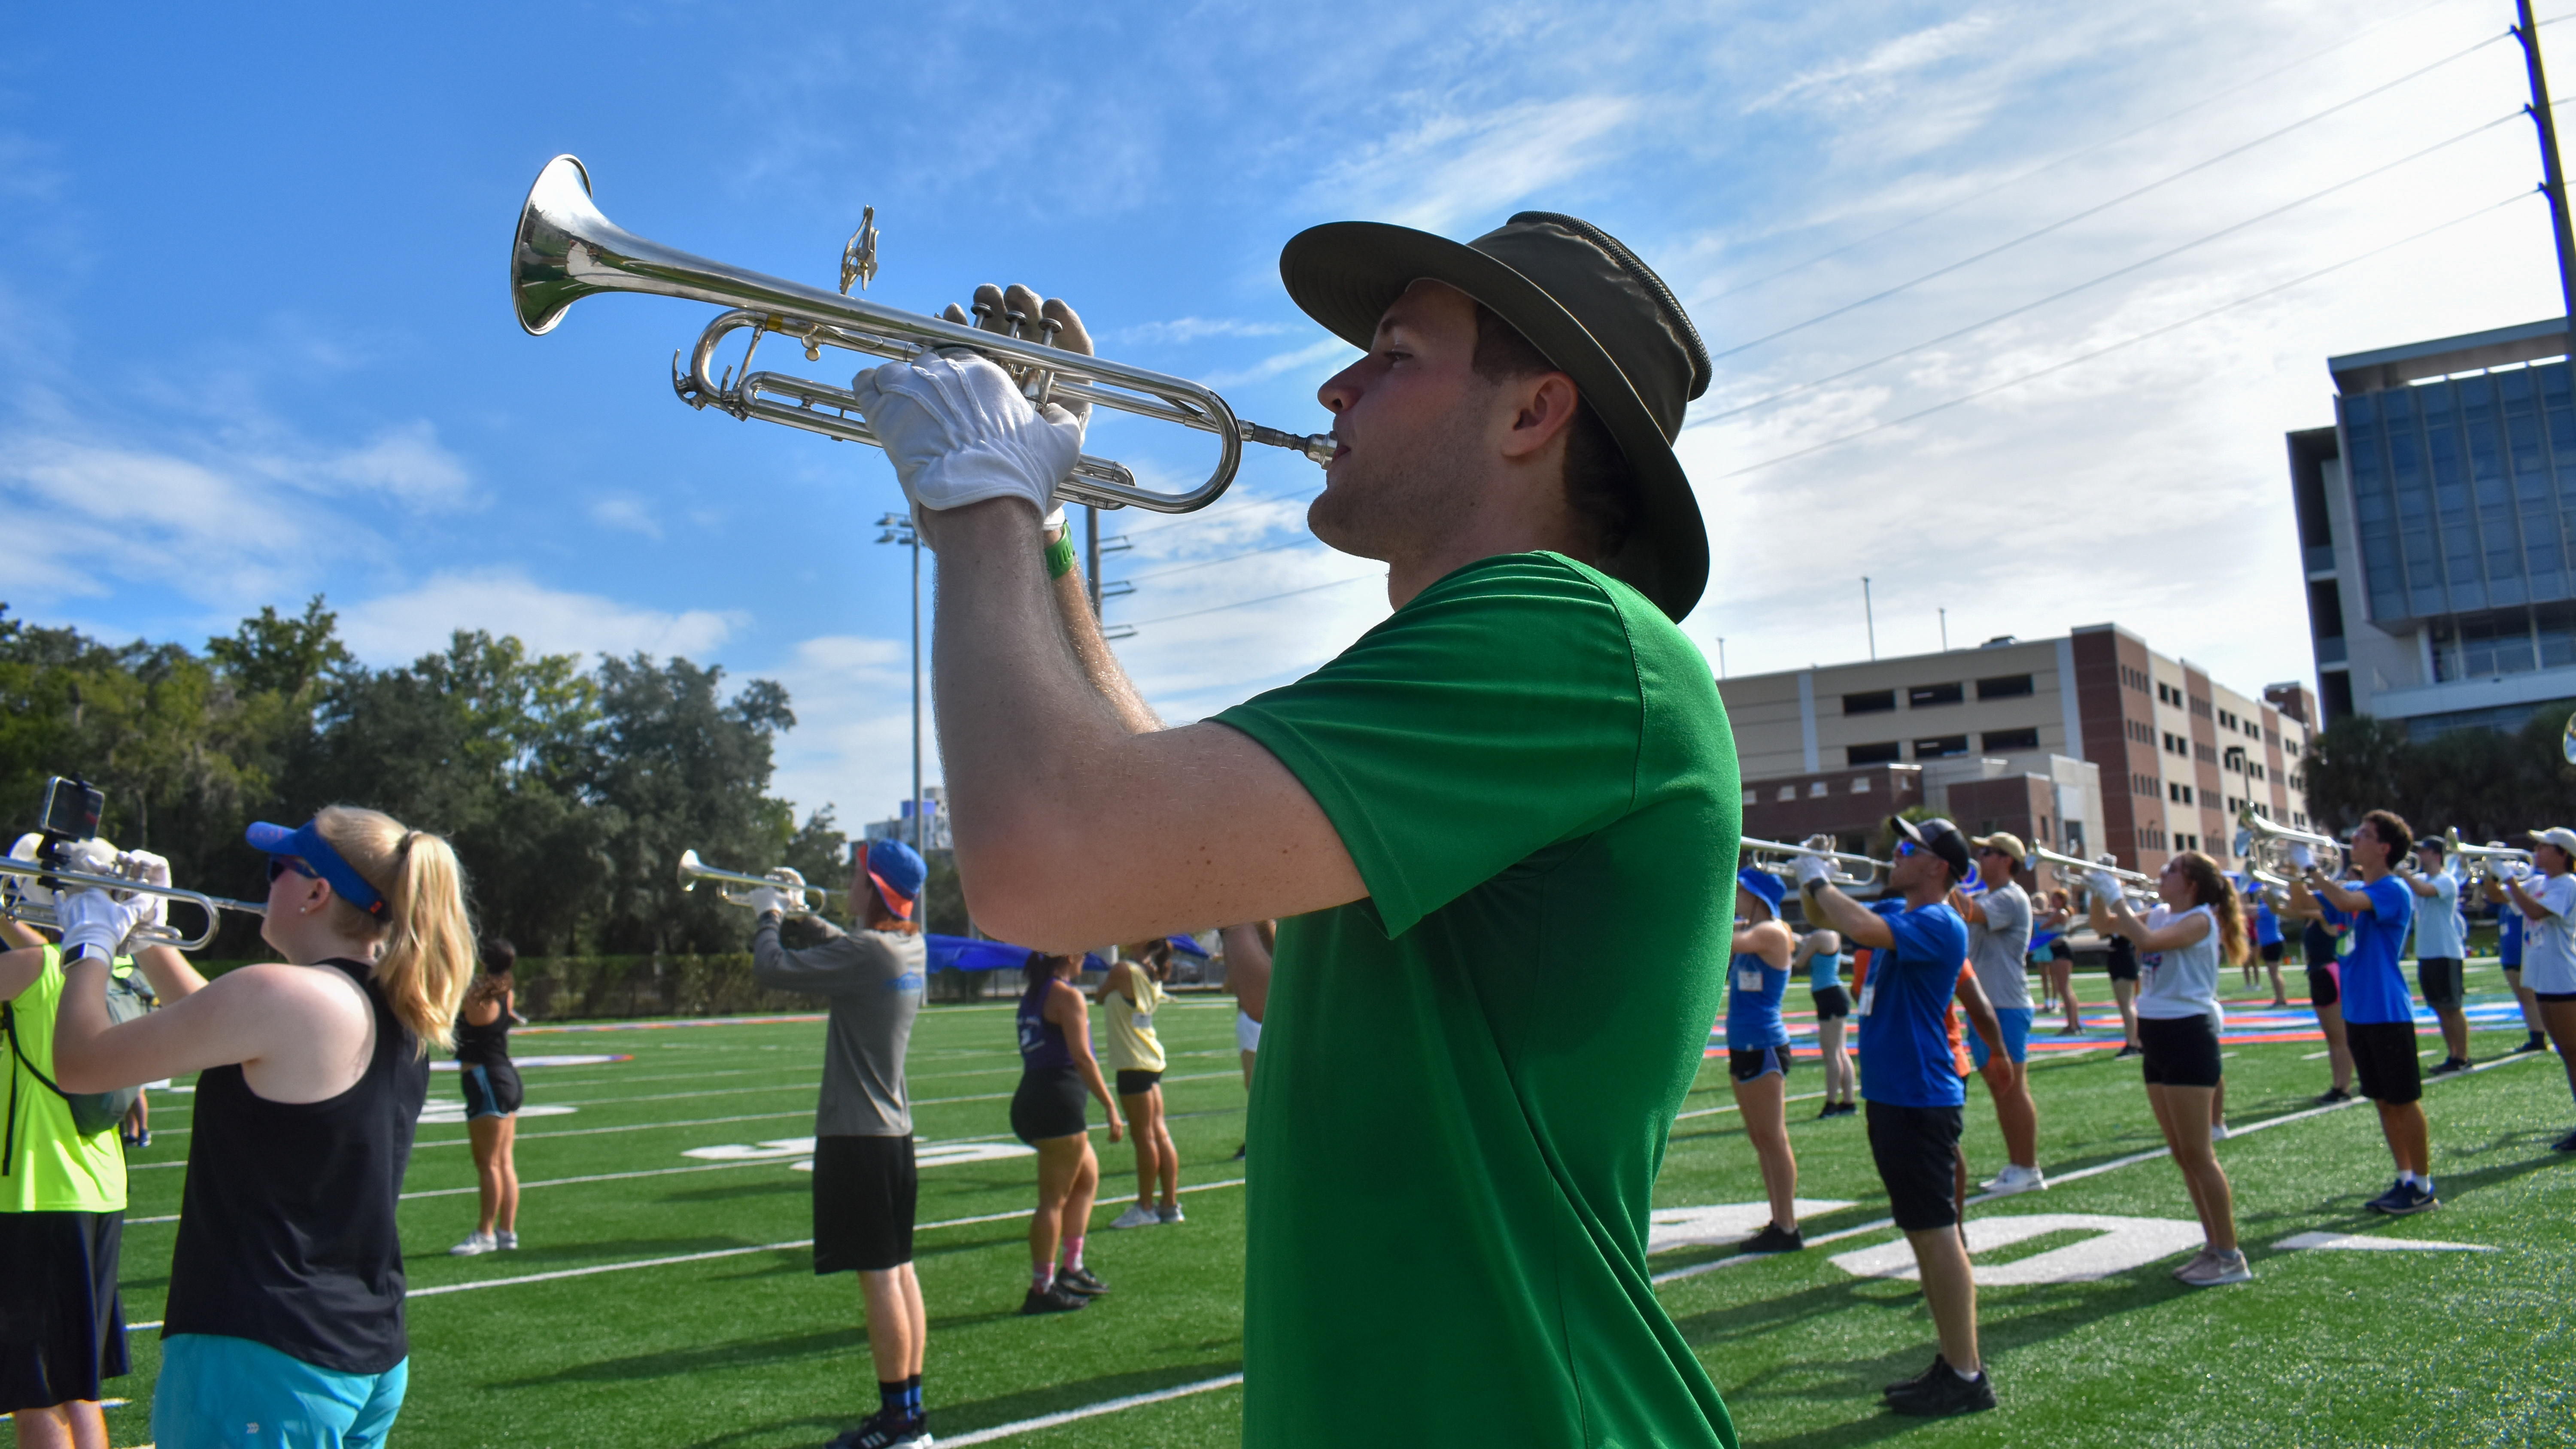 A student plays a trumpet outside.